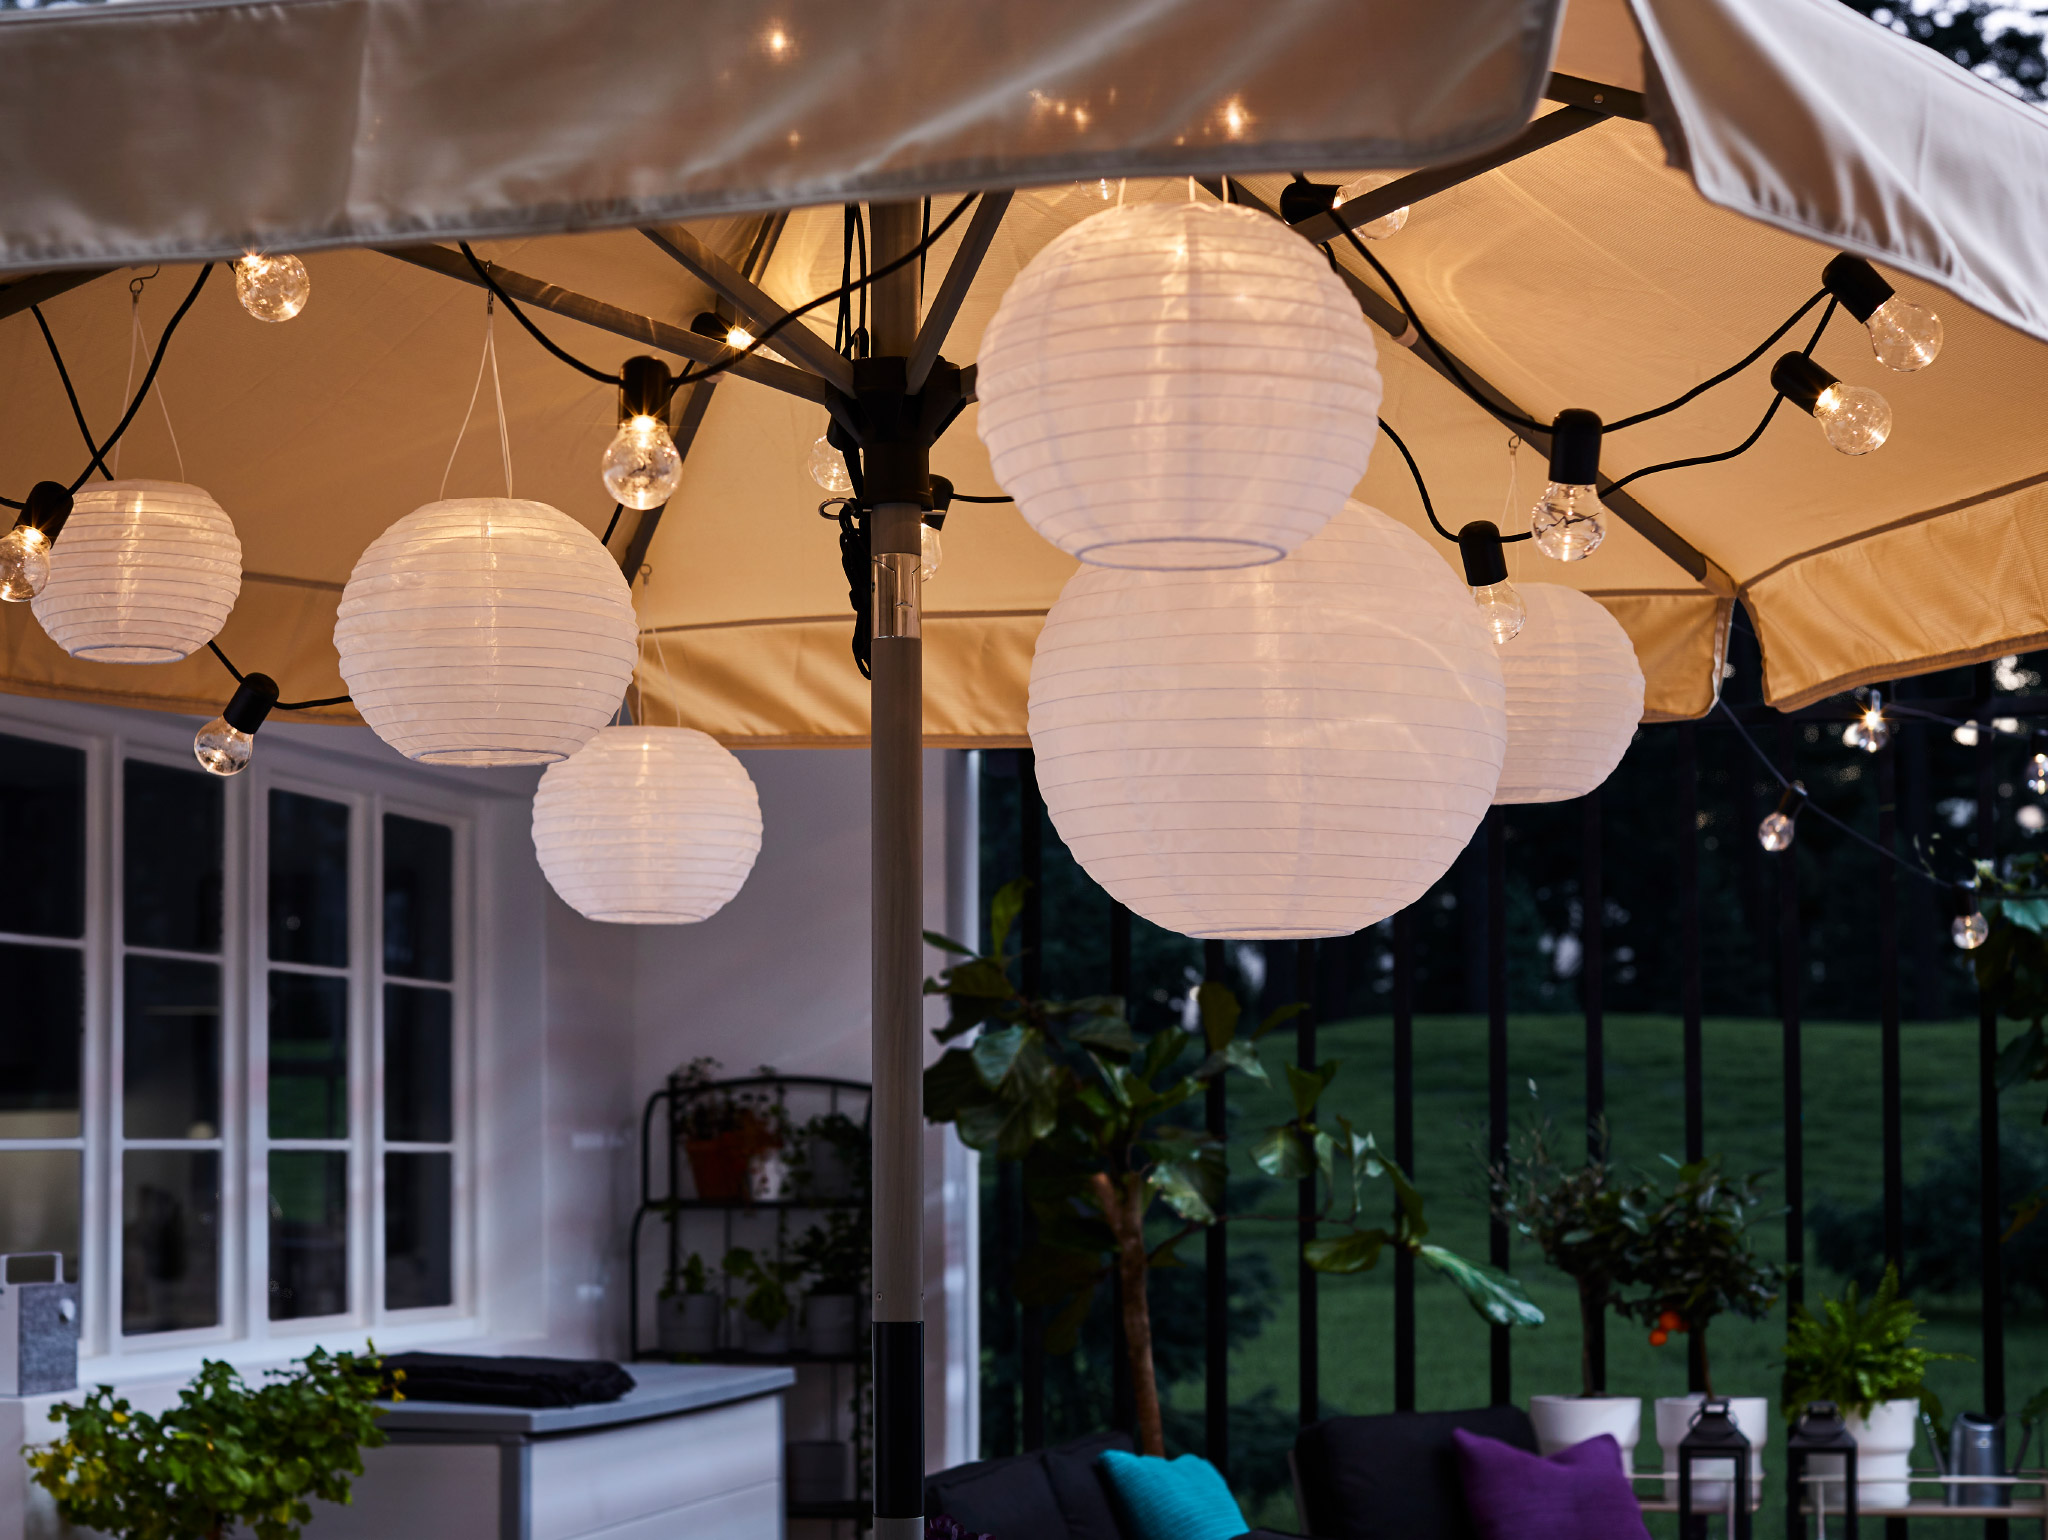 A black lighting chain and round pendant lamps hang under an open parasol, and they give a warm and cosy light.